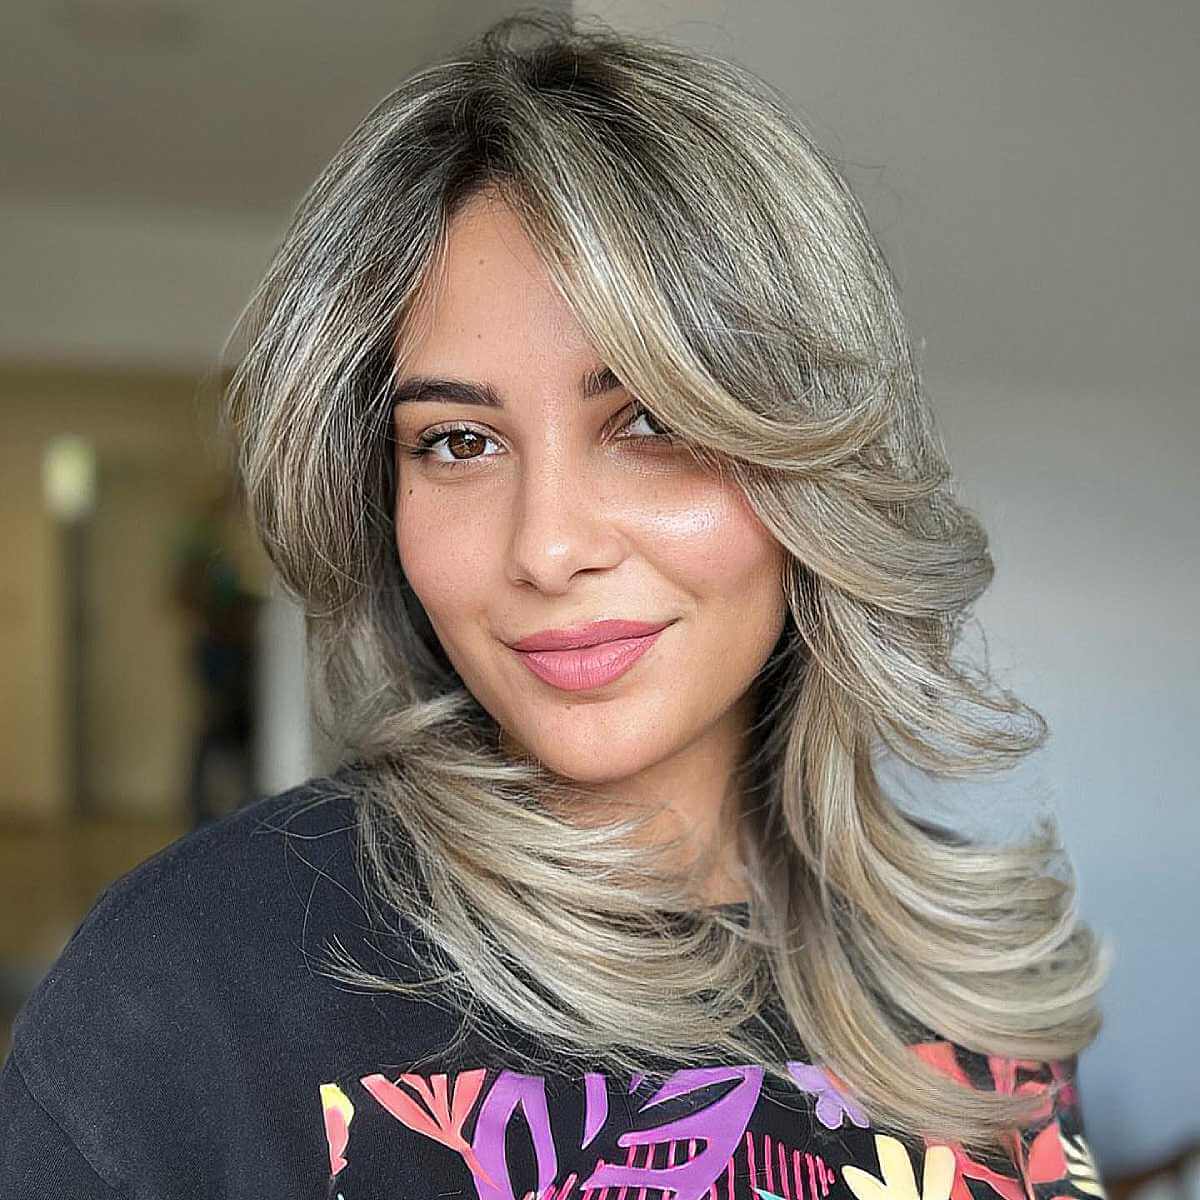 Straight Layered Ashy Blonde Hair with Curled Ends